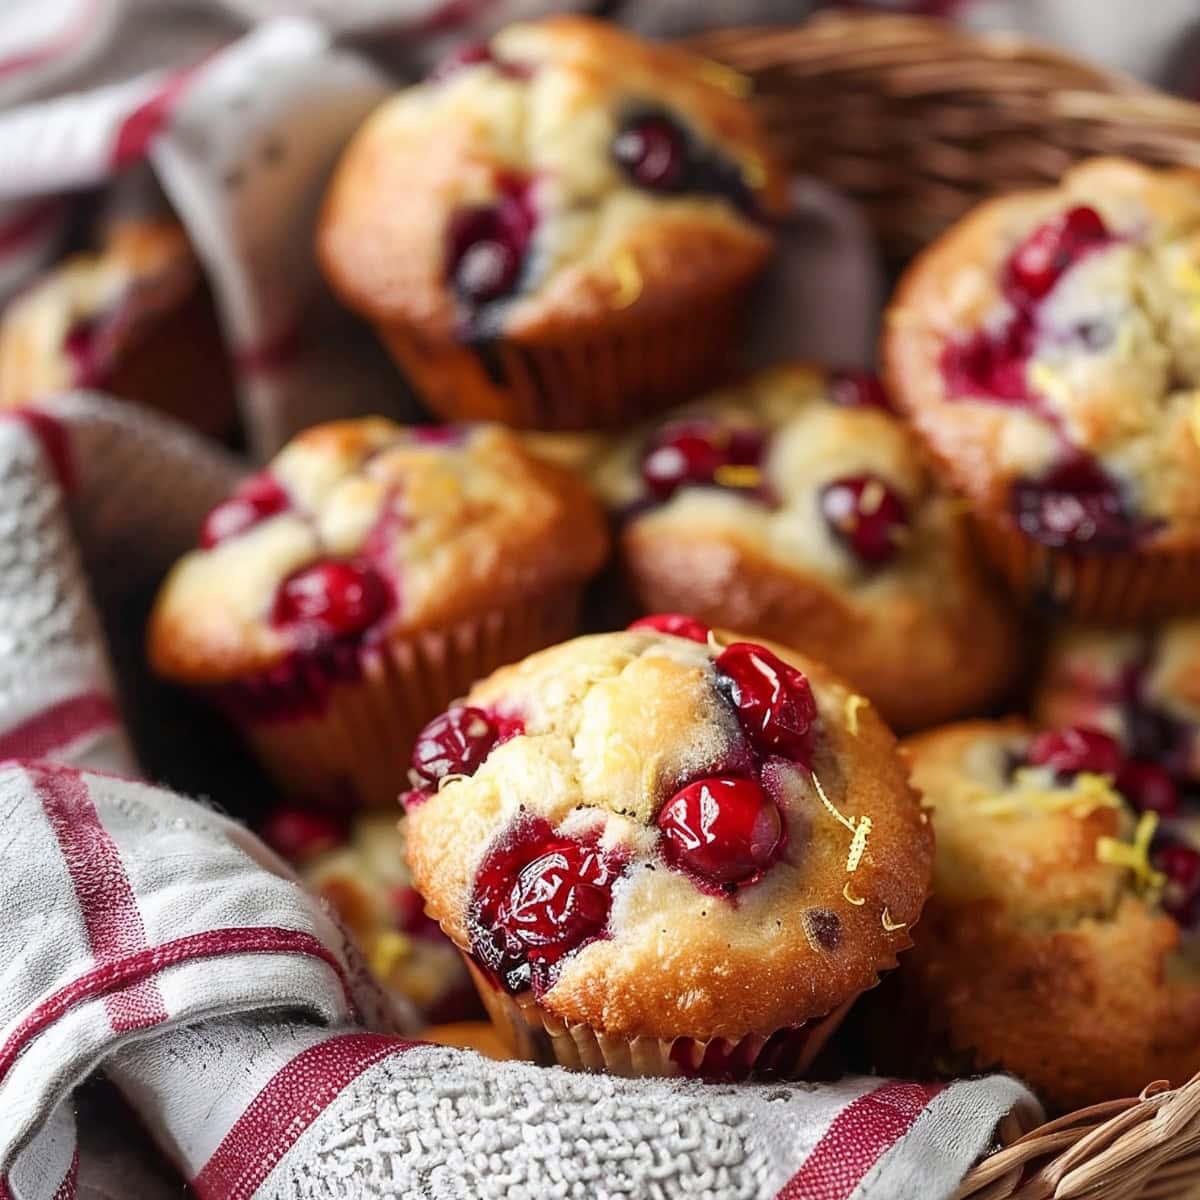 Cranberry Orange Muffins in a Basket with a Red Plaid Kitchen Towel